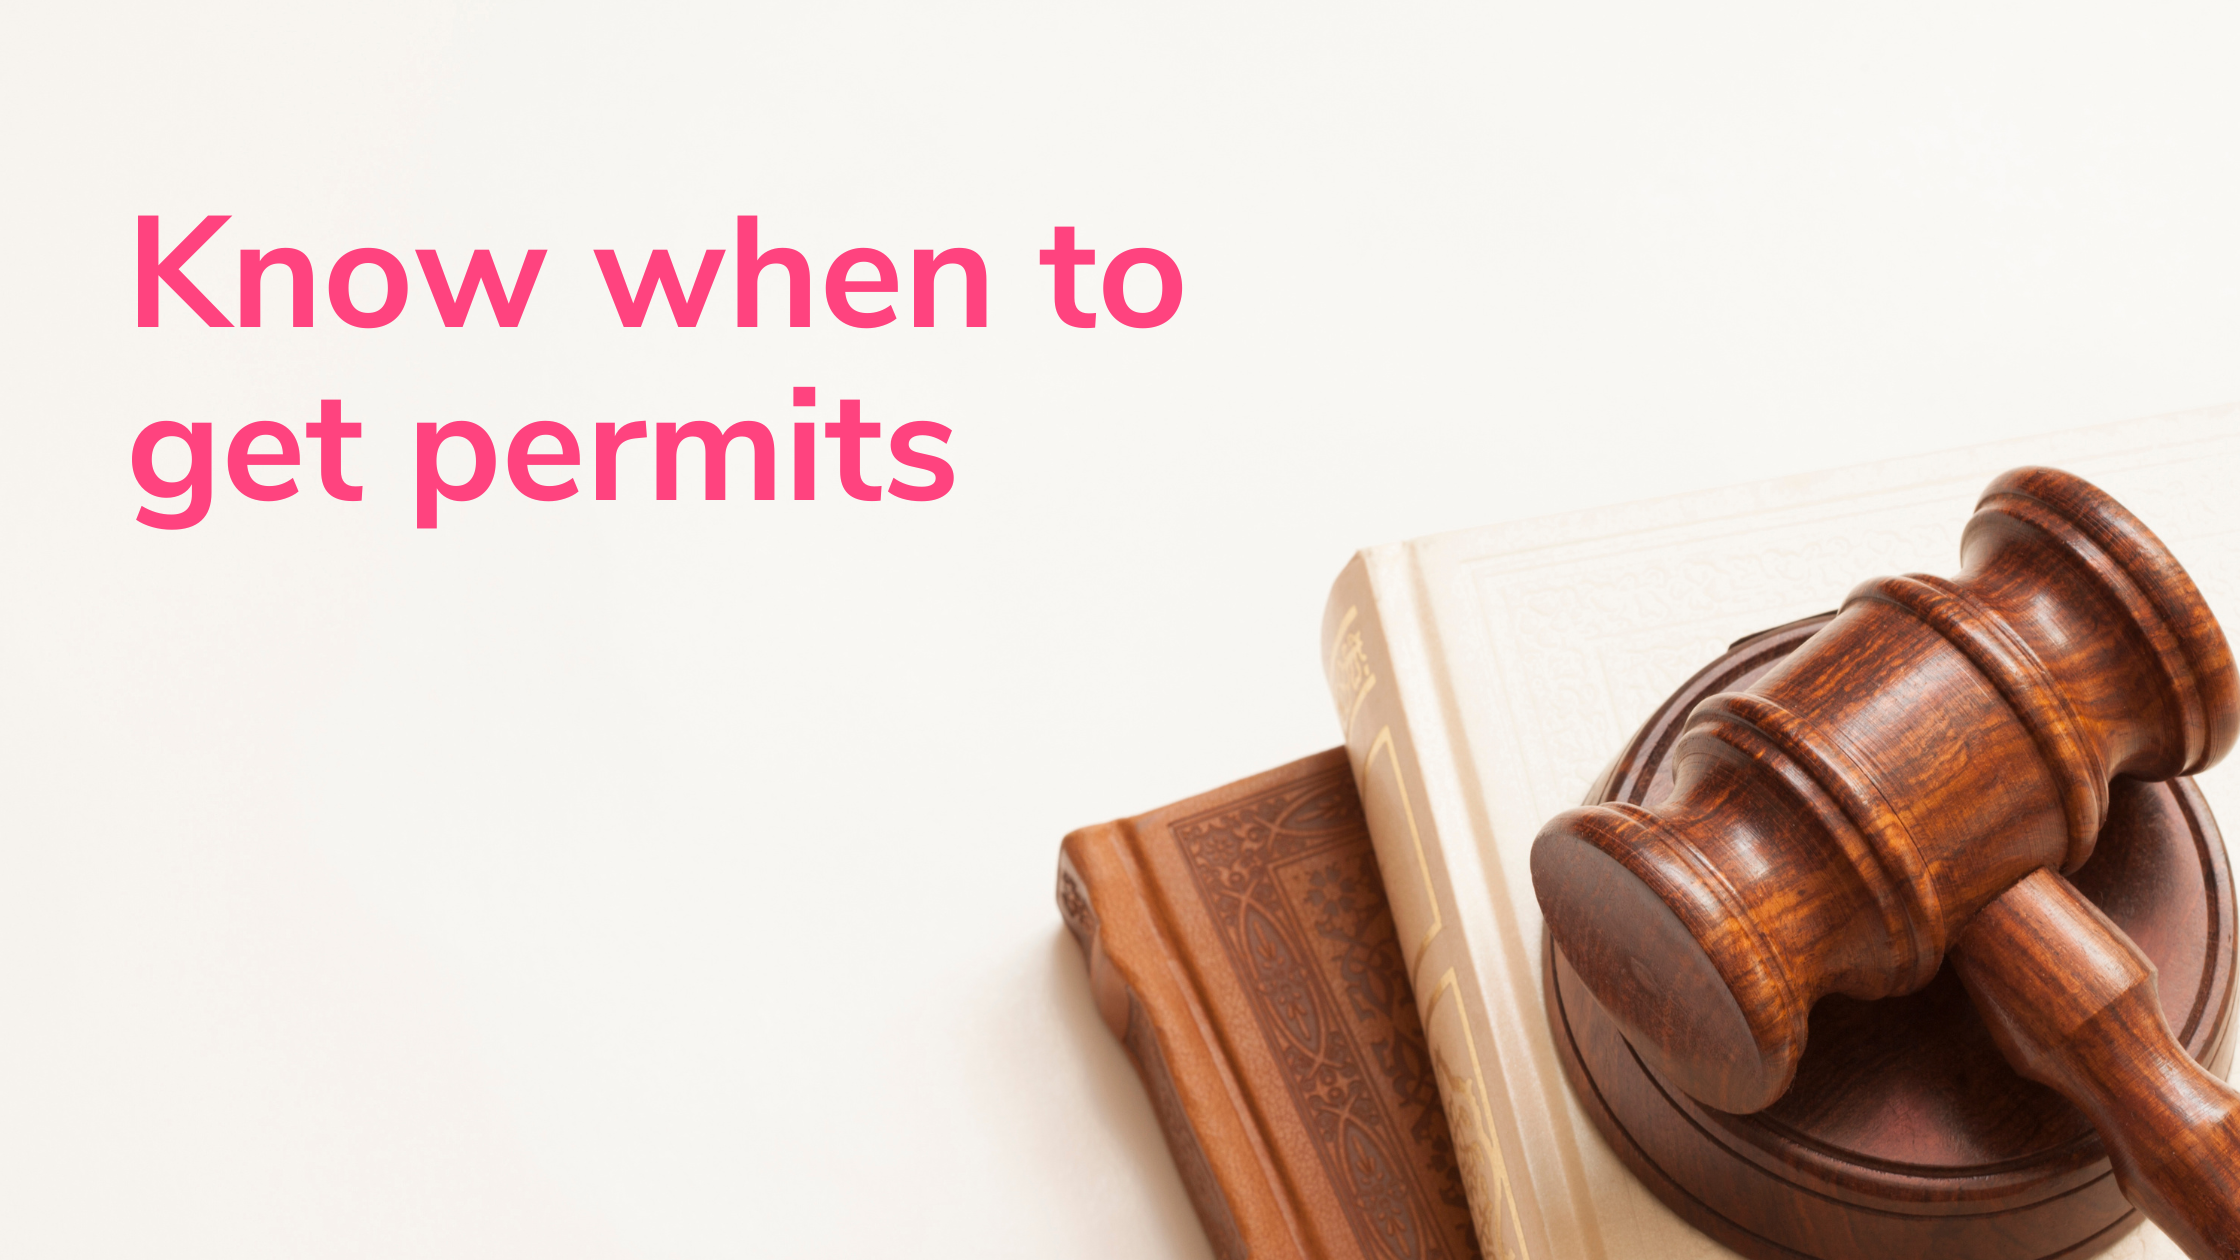 Know when to get permits.